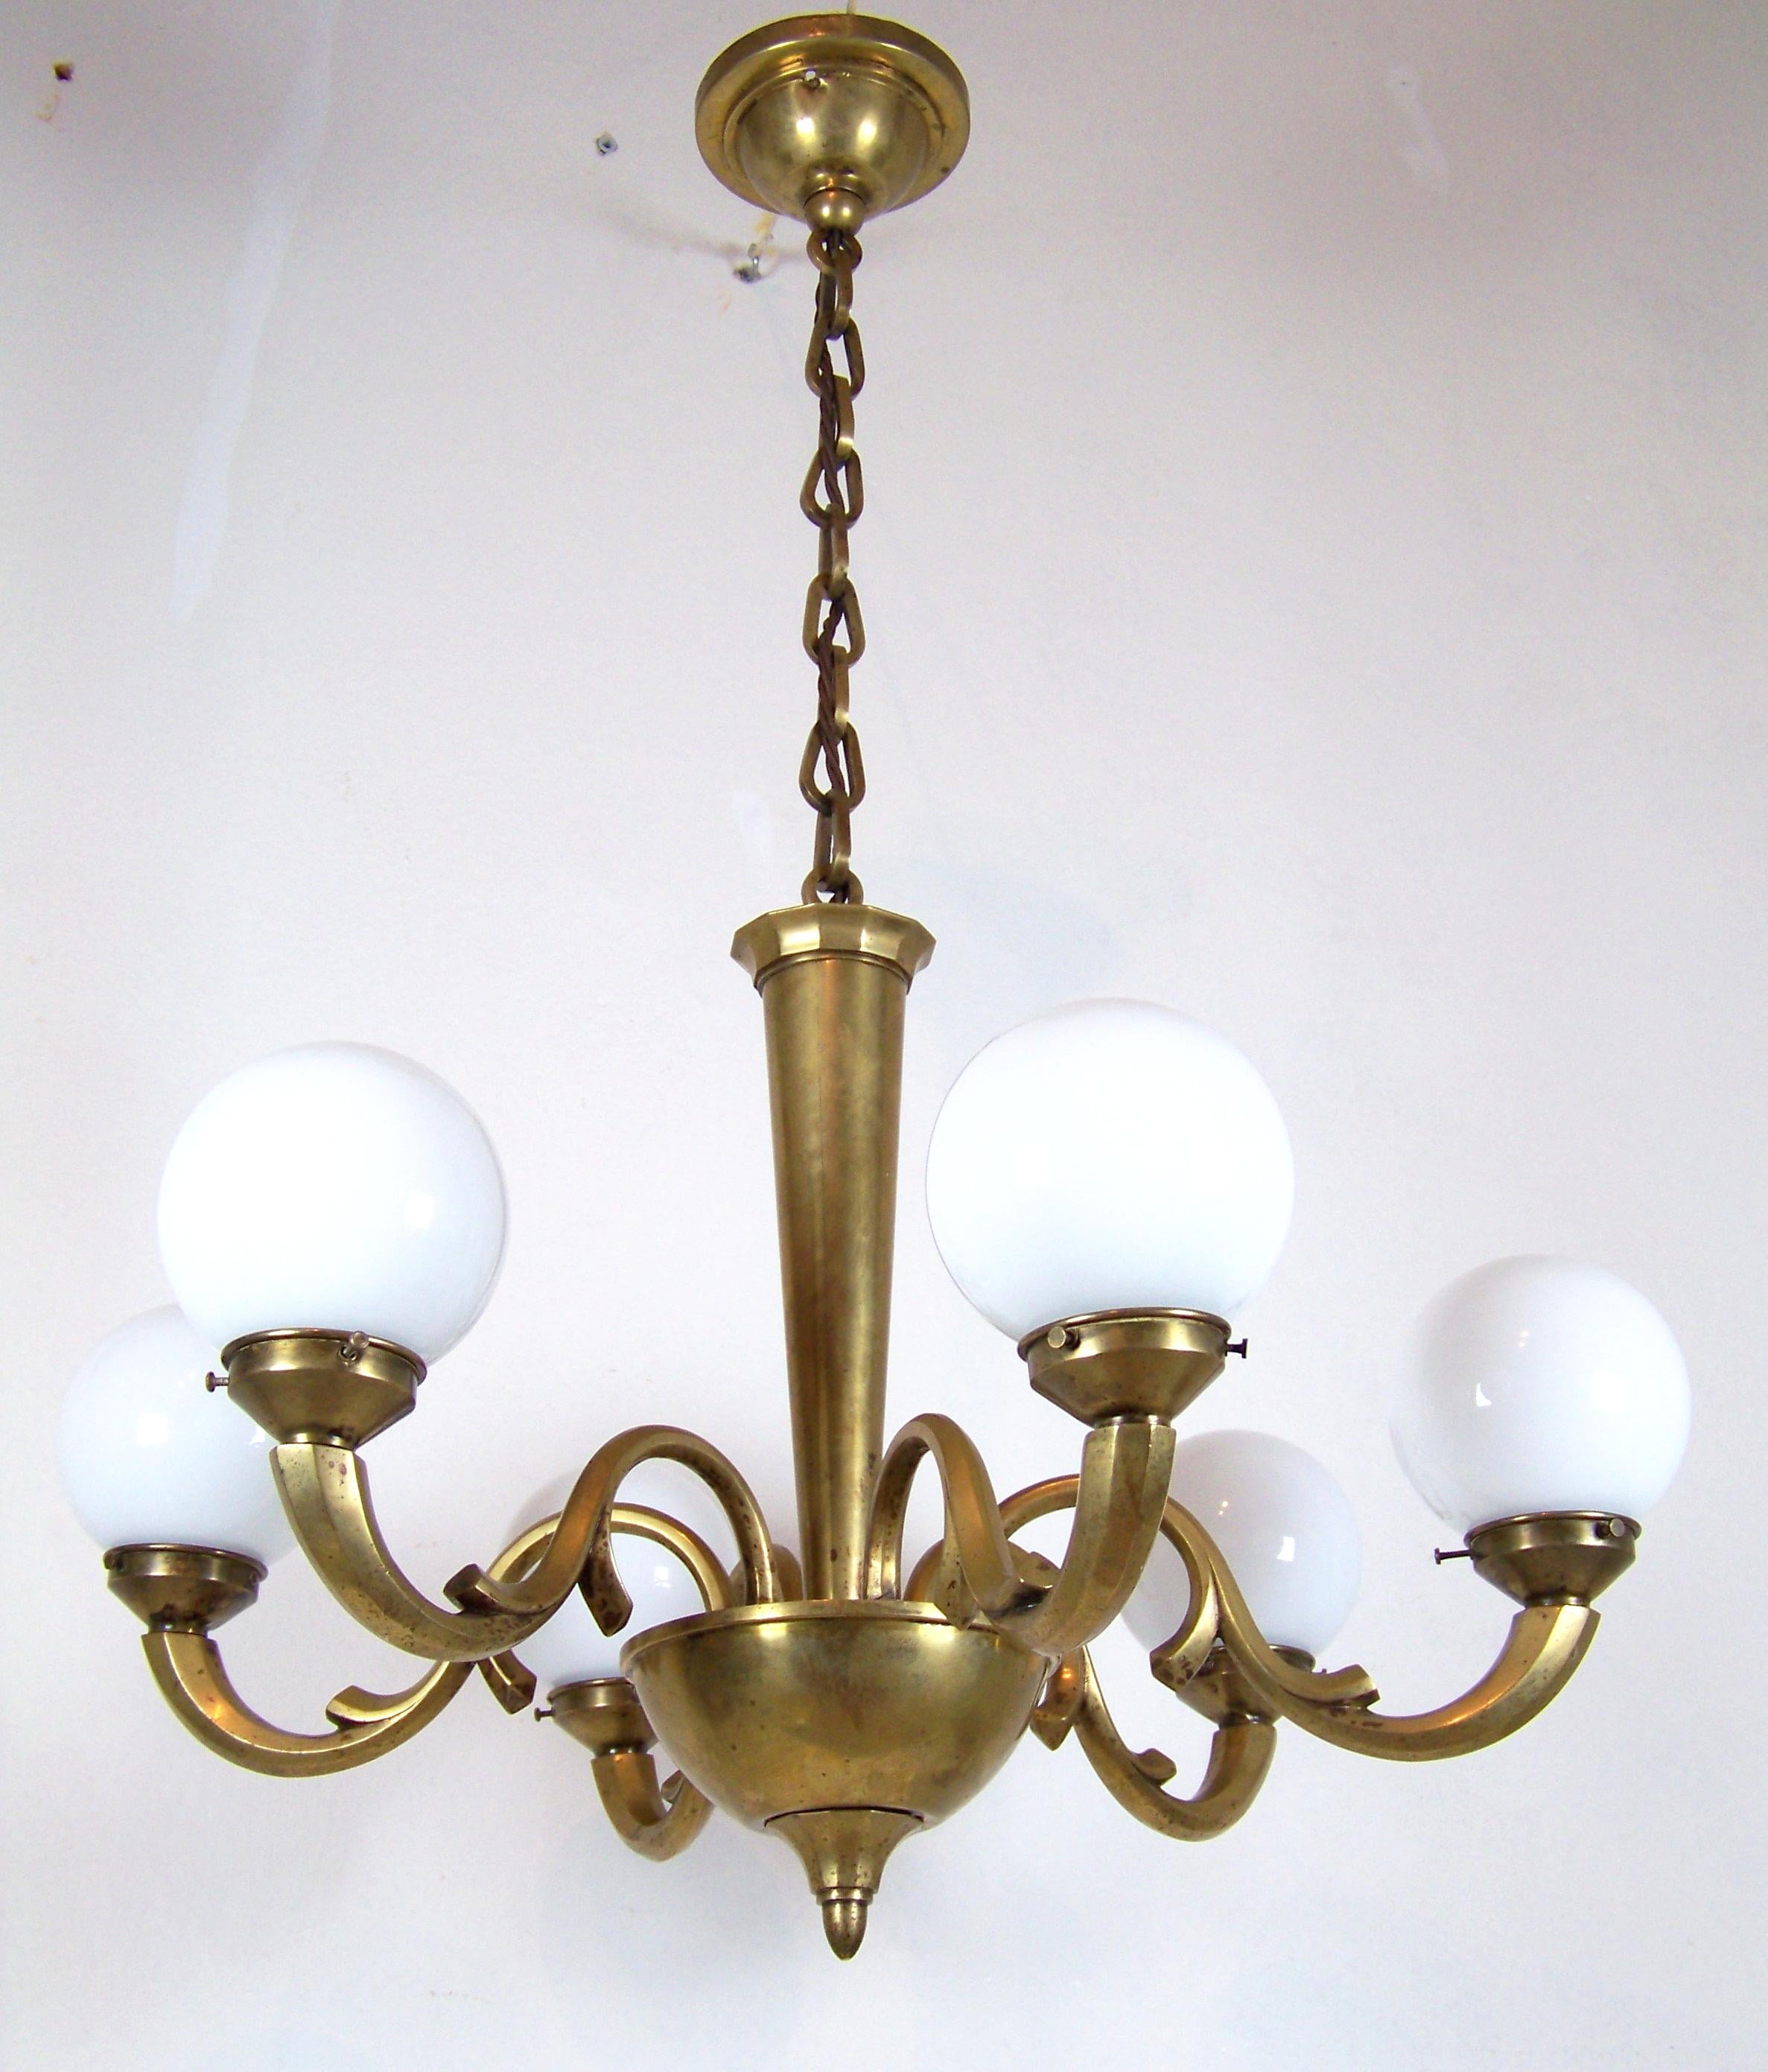 Fully functional. New cabling. New glass balls, hand blown according to the original. E27 bulb. 